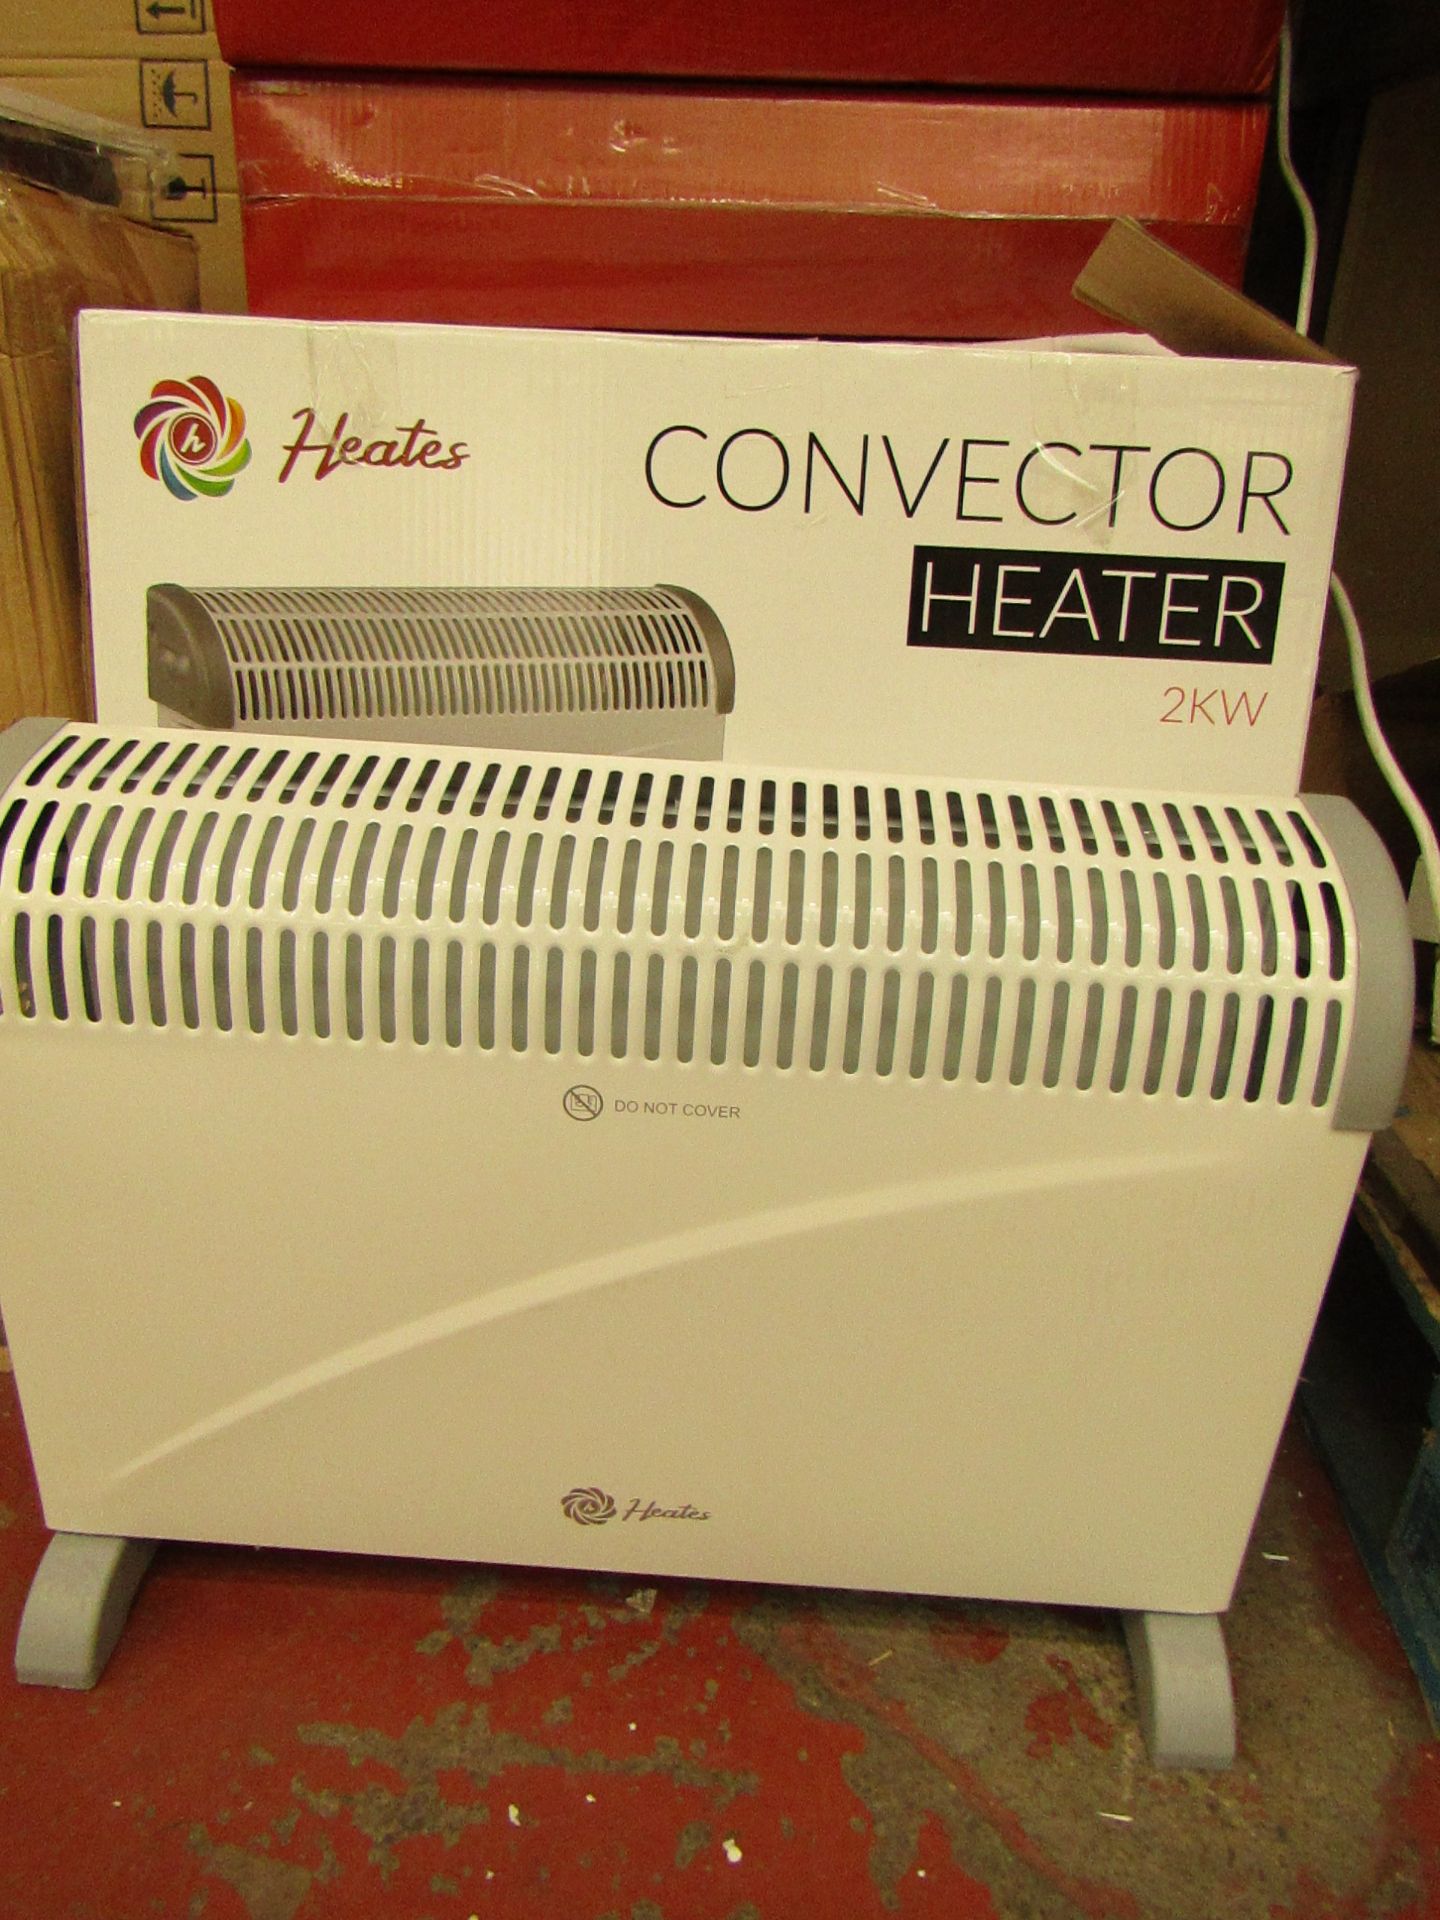 Heates 2kw Convector Heater. New & Tested Working!